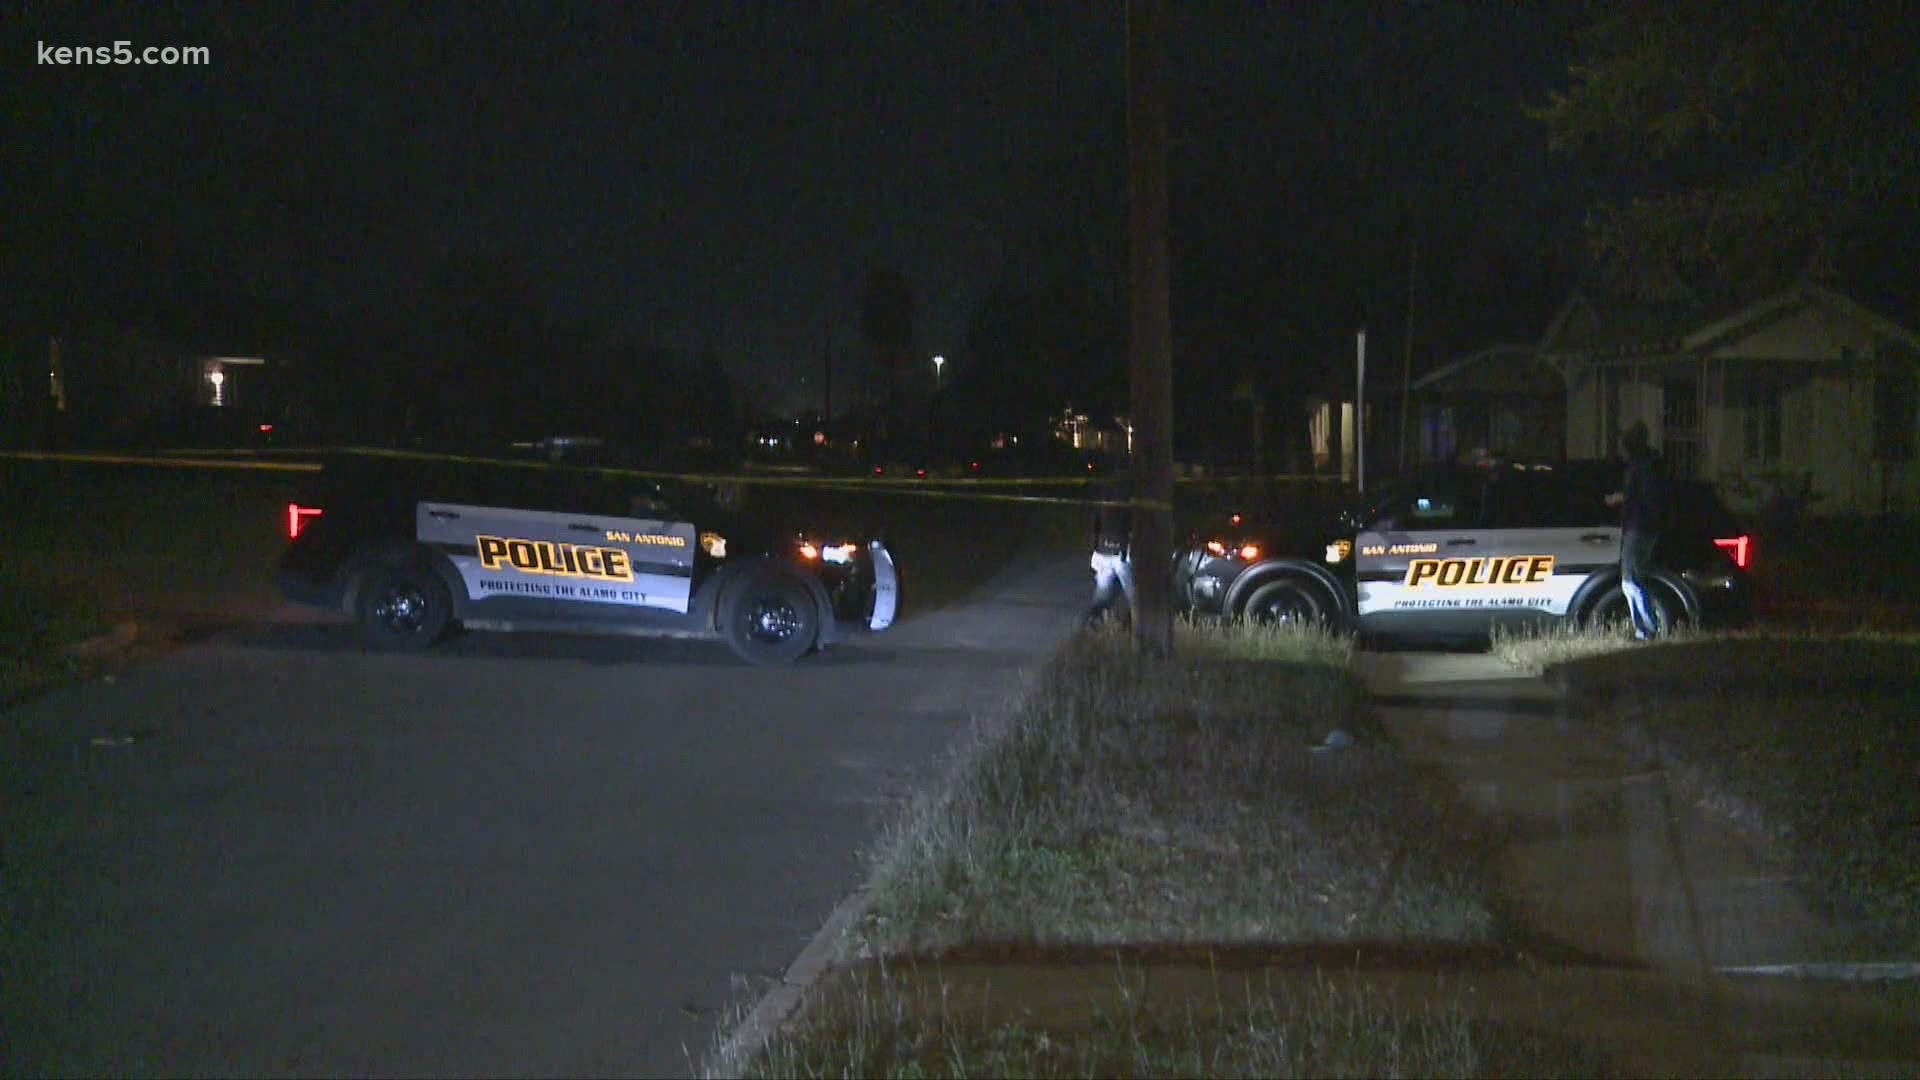 A 60-year-old man heard noises outside his home, and when he opened the front door, he was shot in the leg, the San Antonio Police Department said.